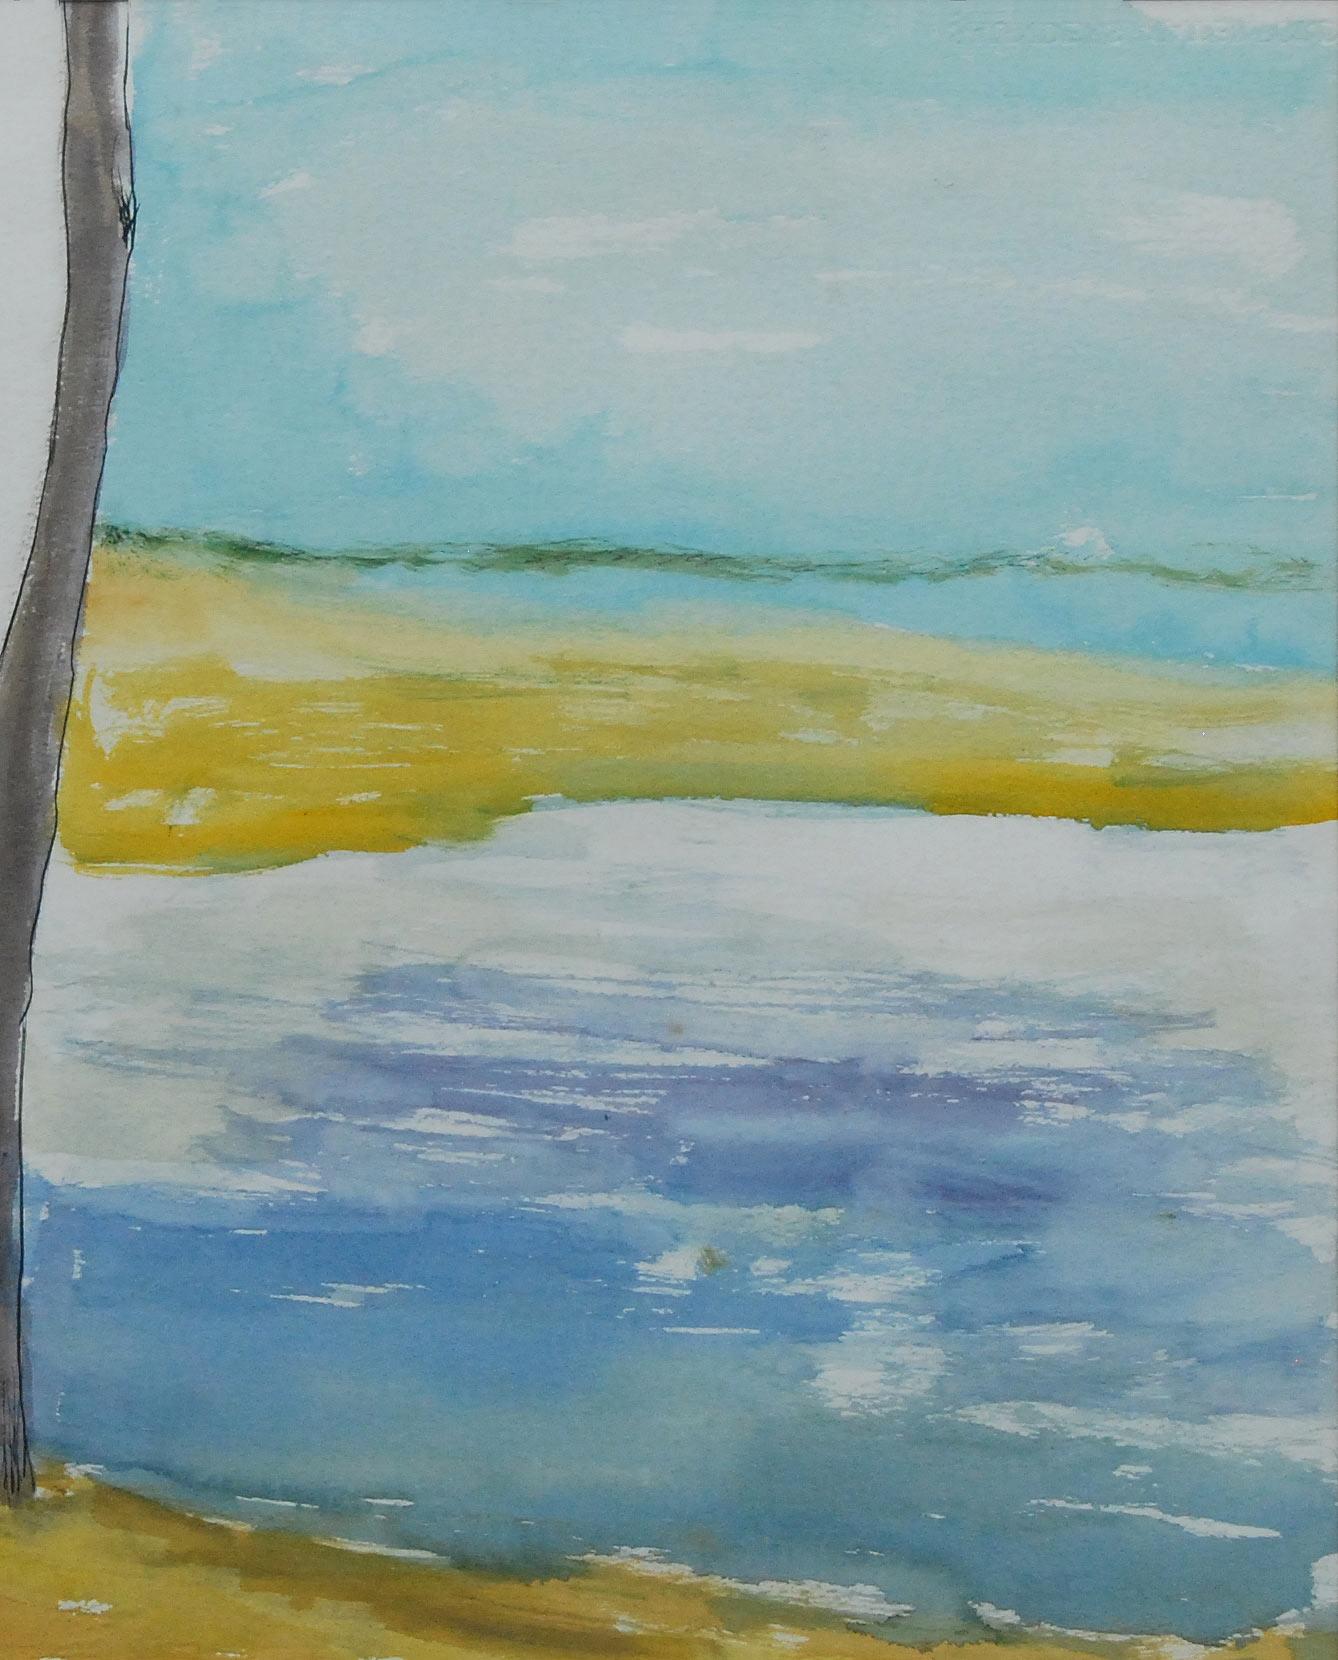 Landscape, Watercolor on paper, Blue, Brown, Yellow by Modern Artist 